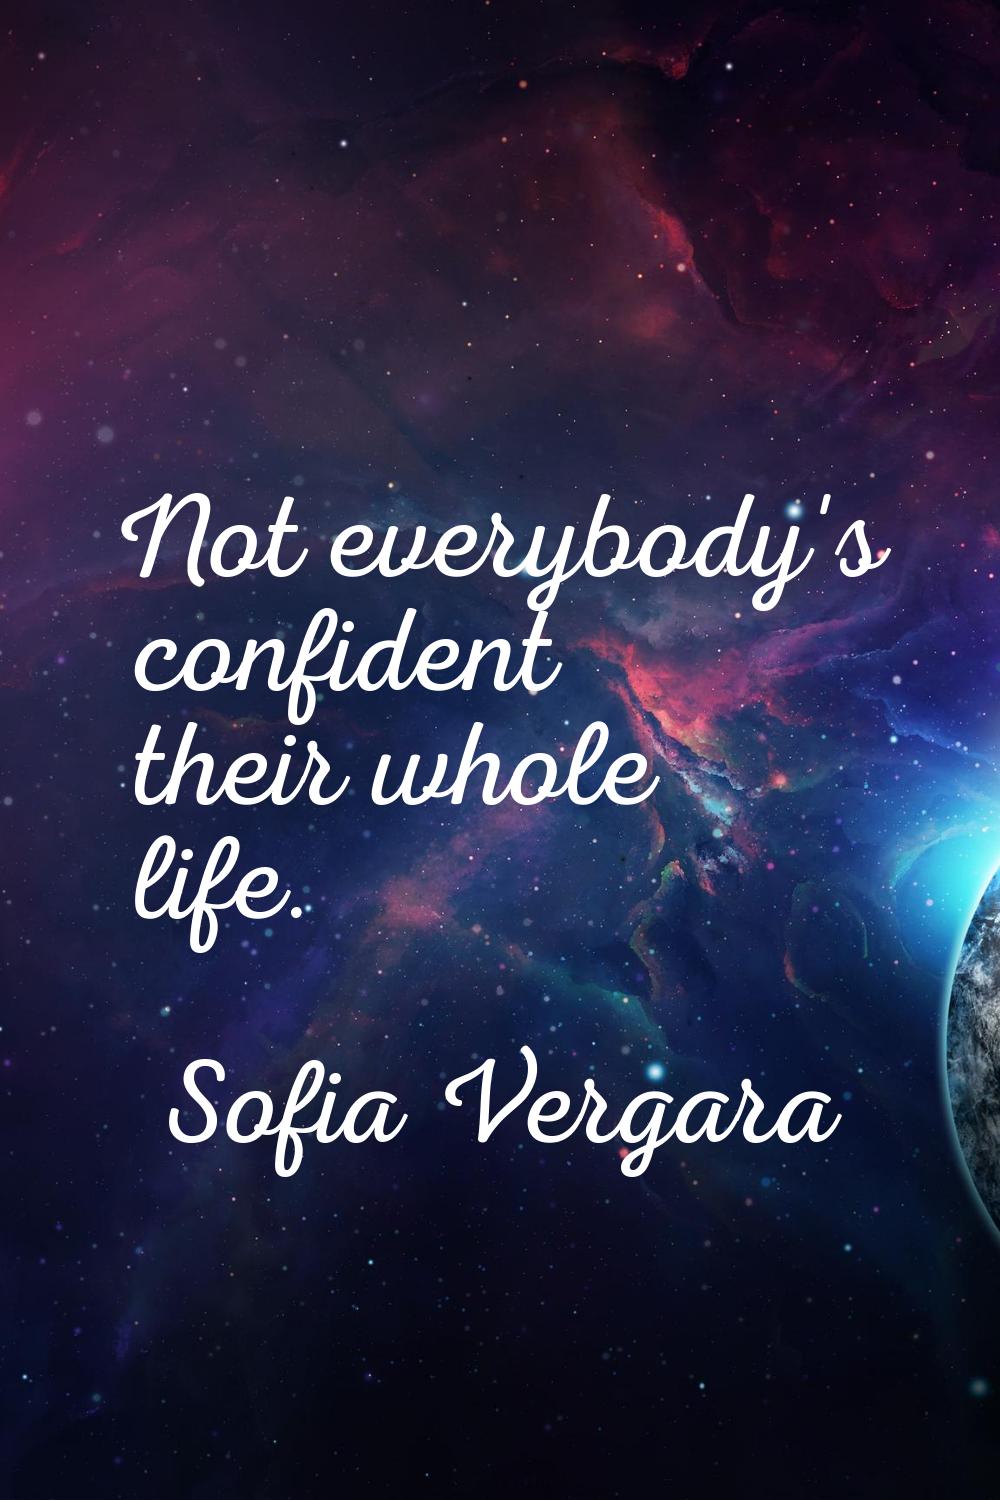 Not everybody's confident their whole life.